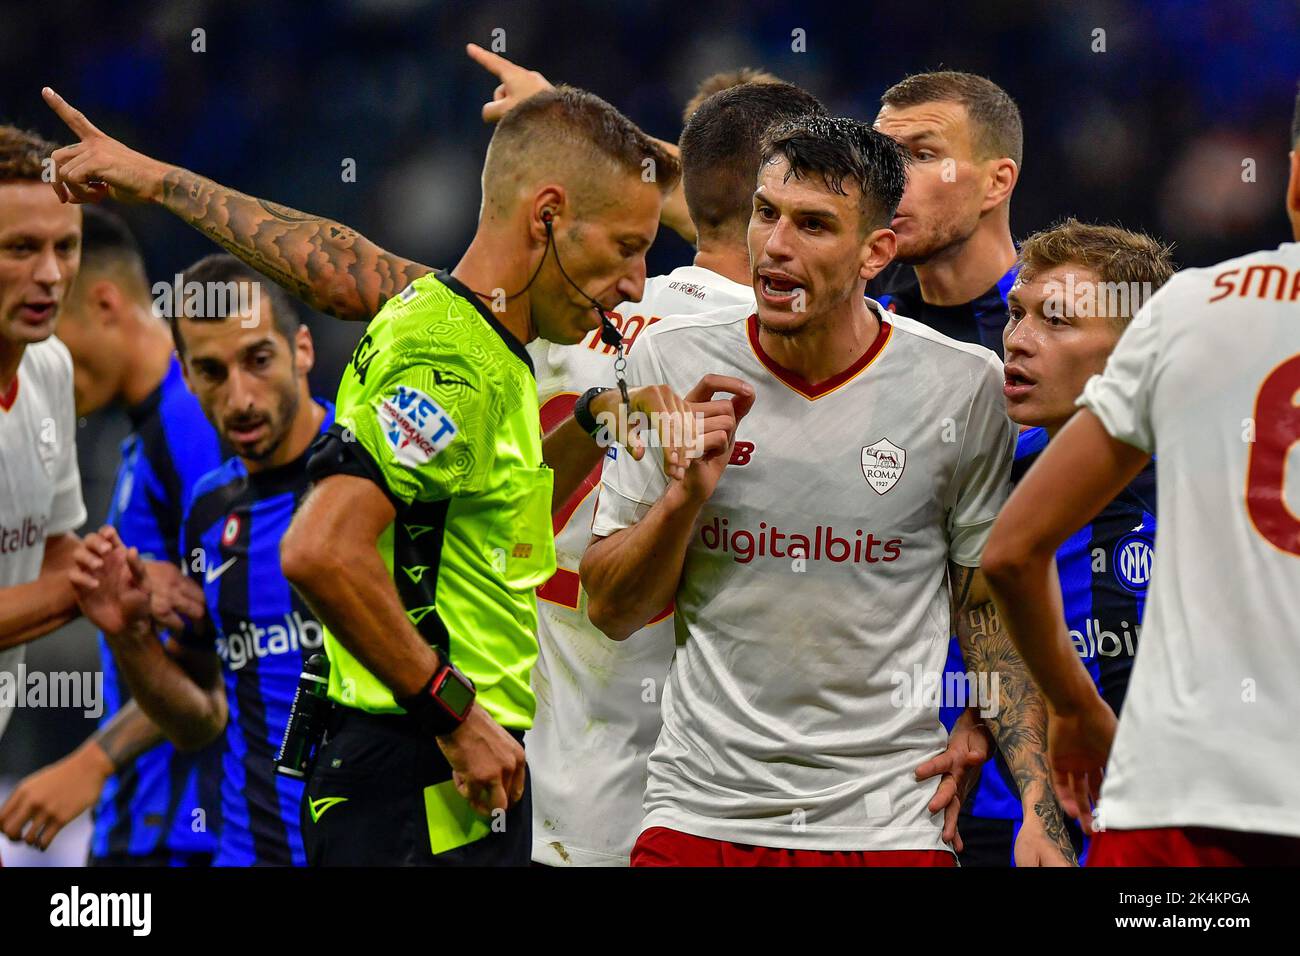 Milano, Italy. 01st, October 2022. Roger Ibanez of Roma seen during the Serie A match between Inter and Roma at Giuseppe Meazza in Milano. (Photo credit: Gonzales Photo - Tommaso Fimiano). Stock Photo